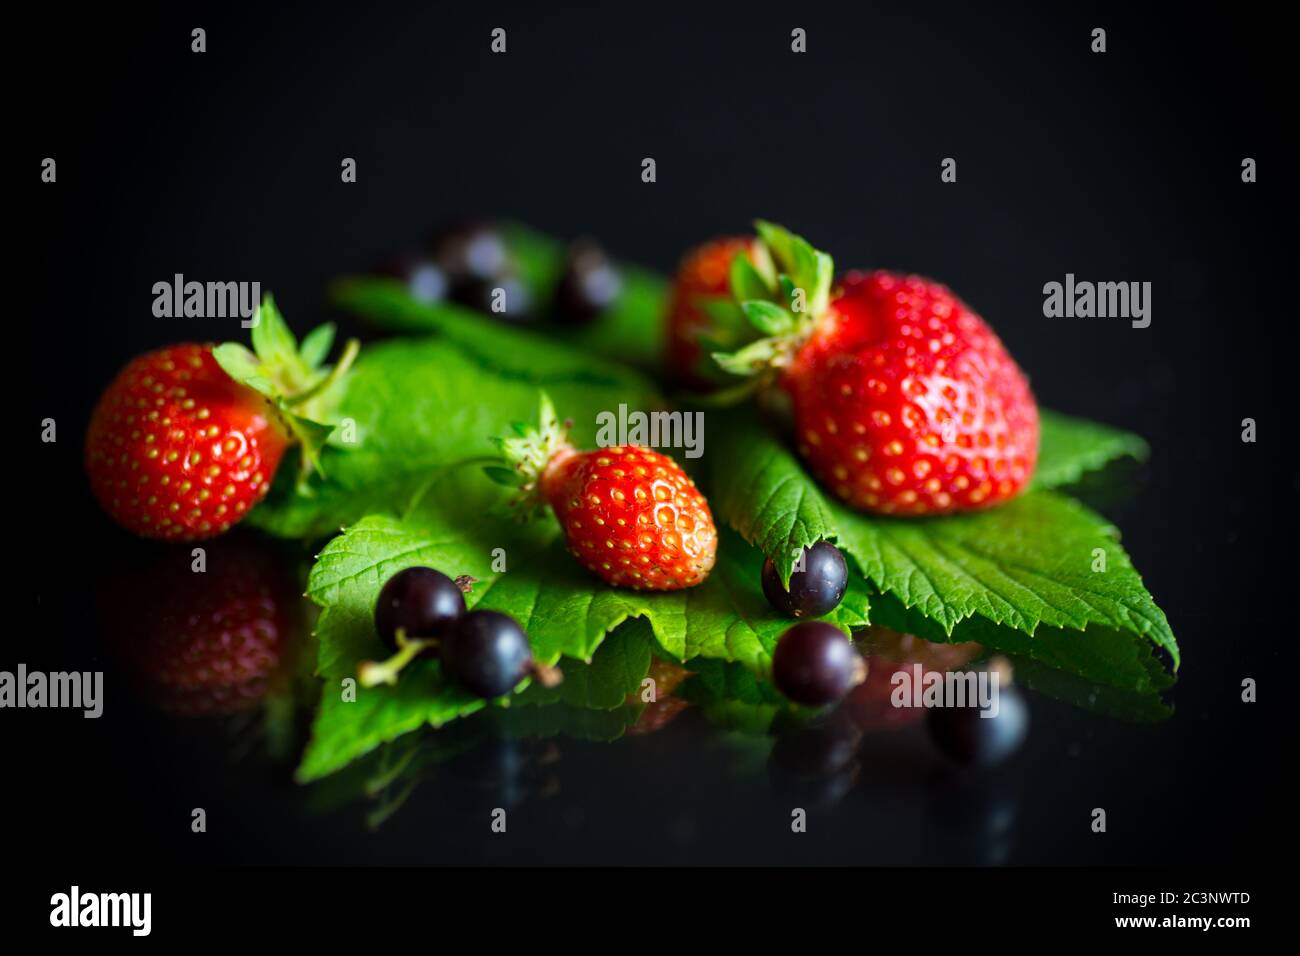 ripe red strawberries and berries of black currant Stock Photo